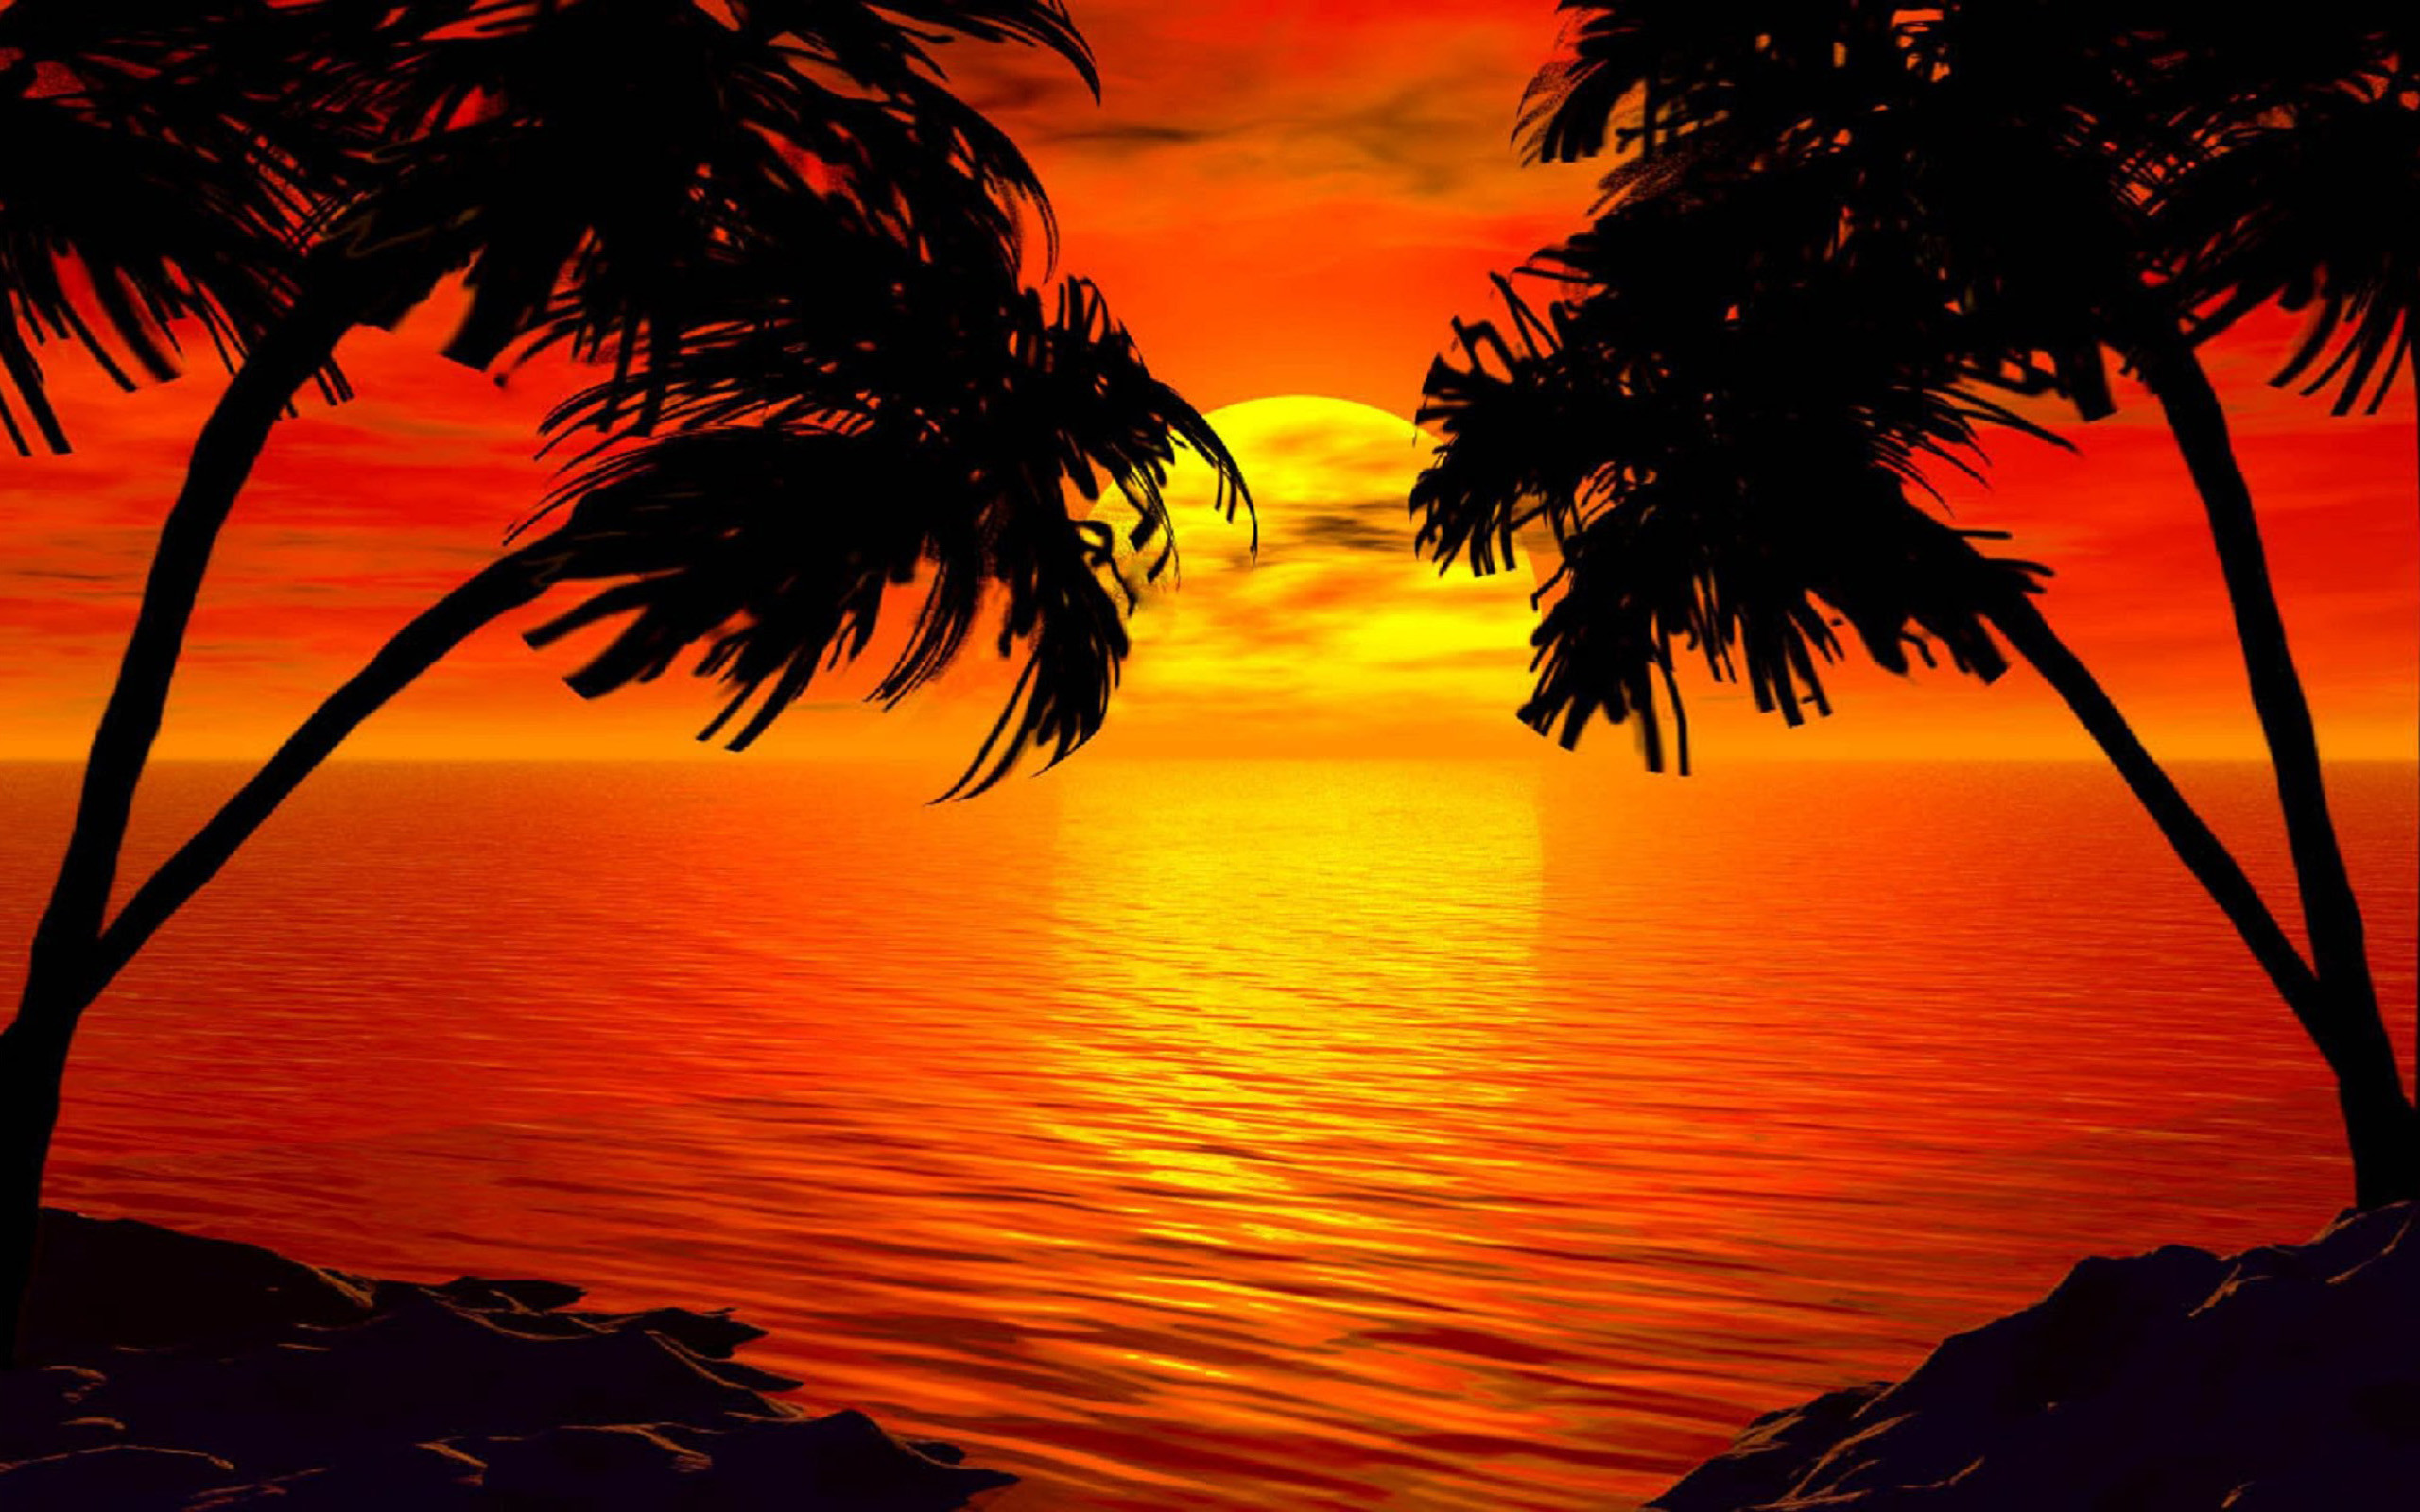 2. "Tropical Sunset" - wide 8